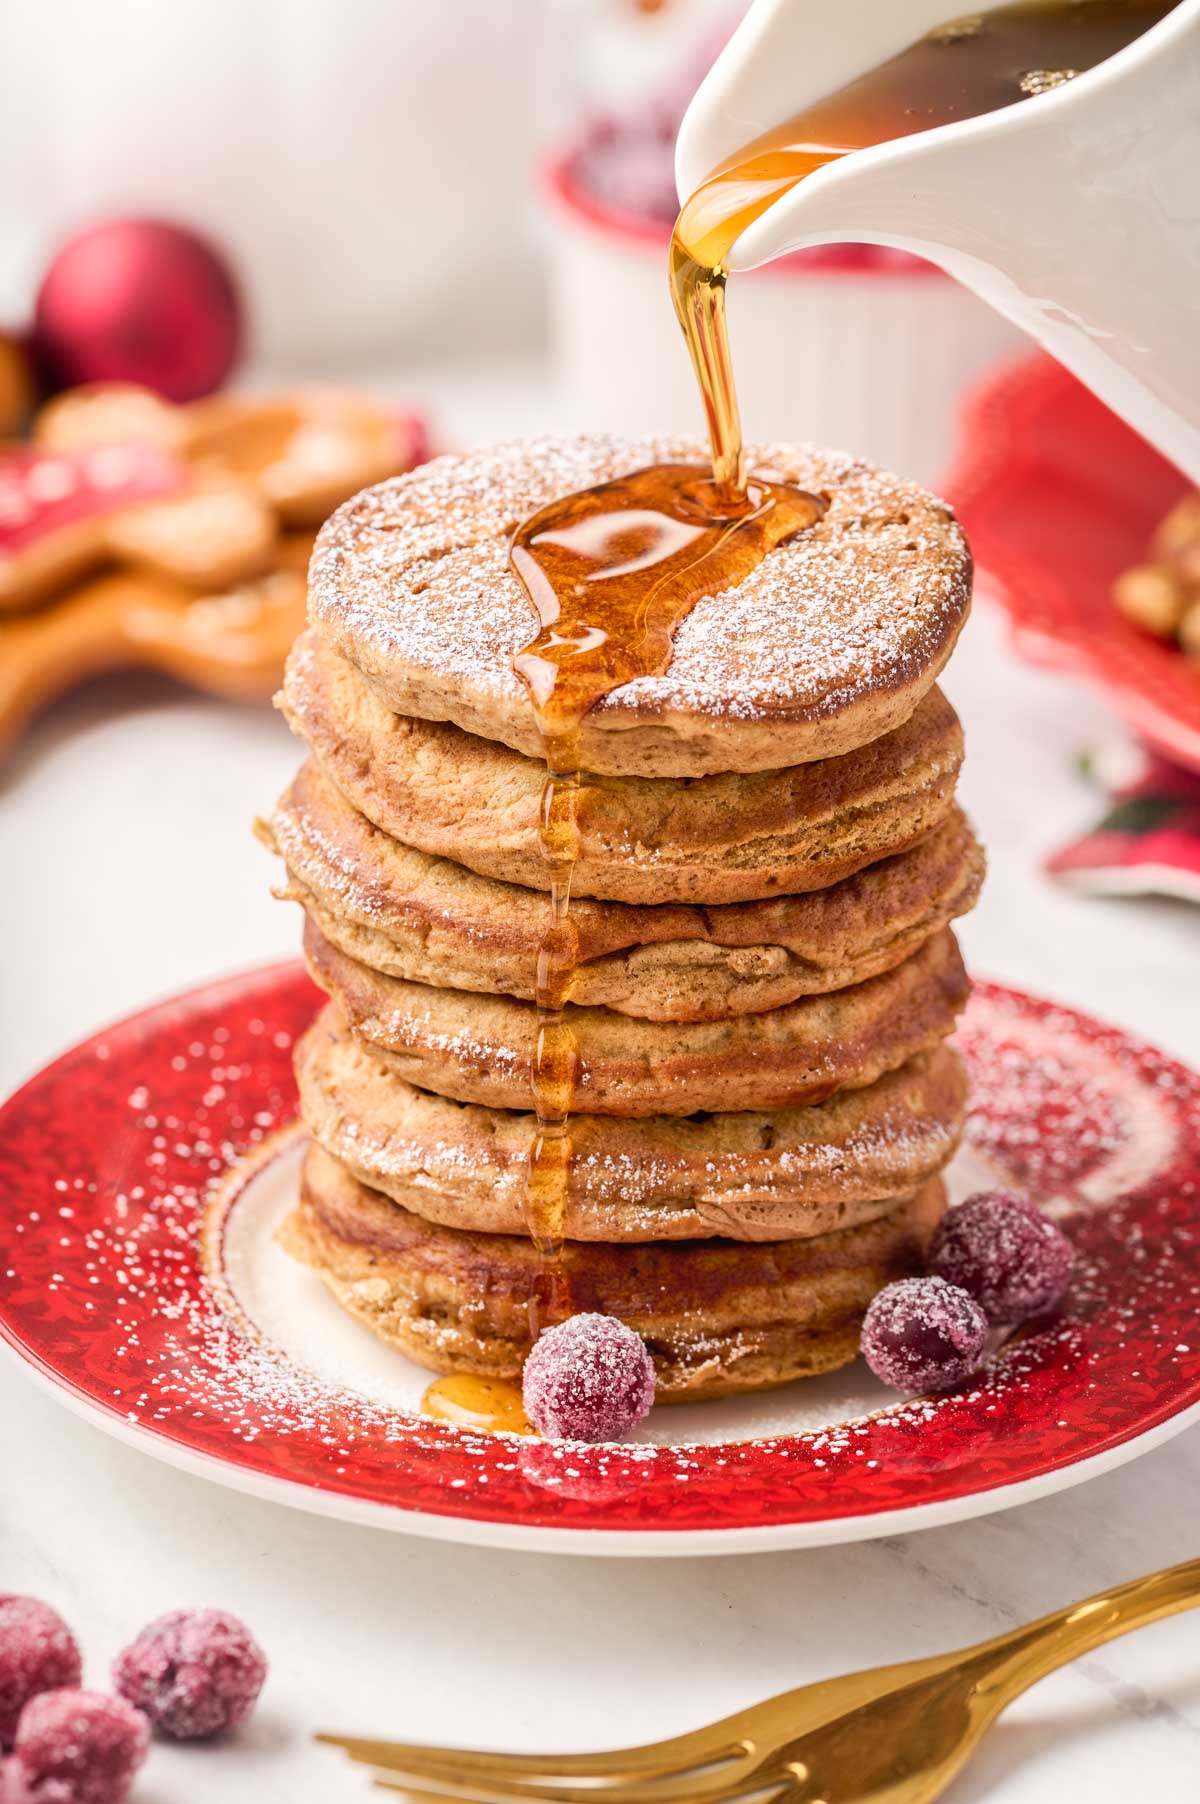 maple syrup being poured over a stack of gingerbread pancakes dusted with powdered sugar